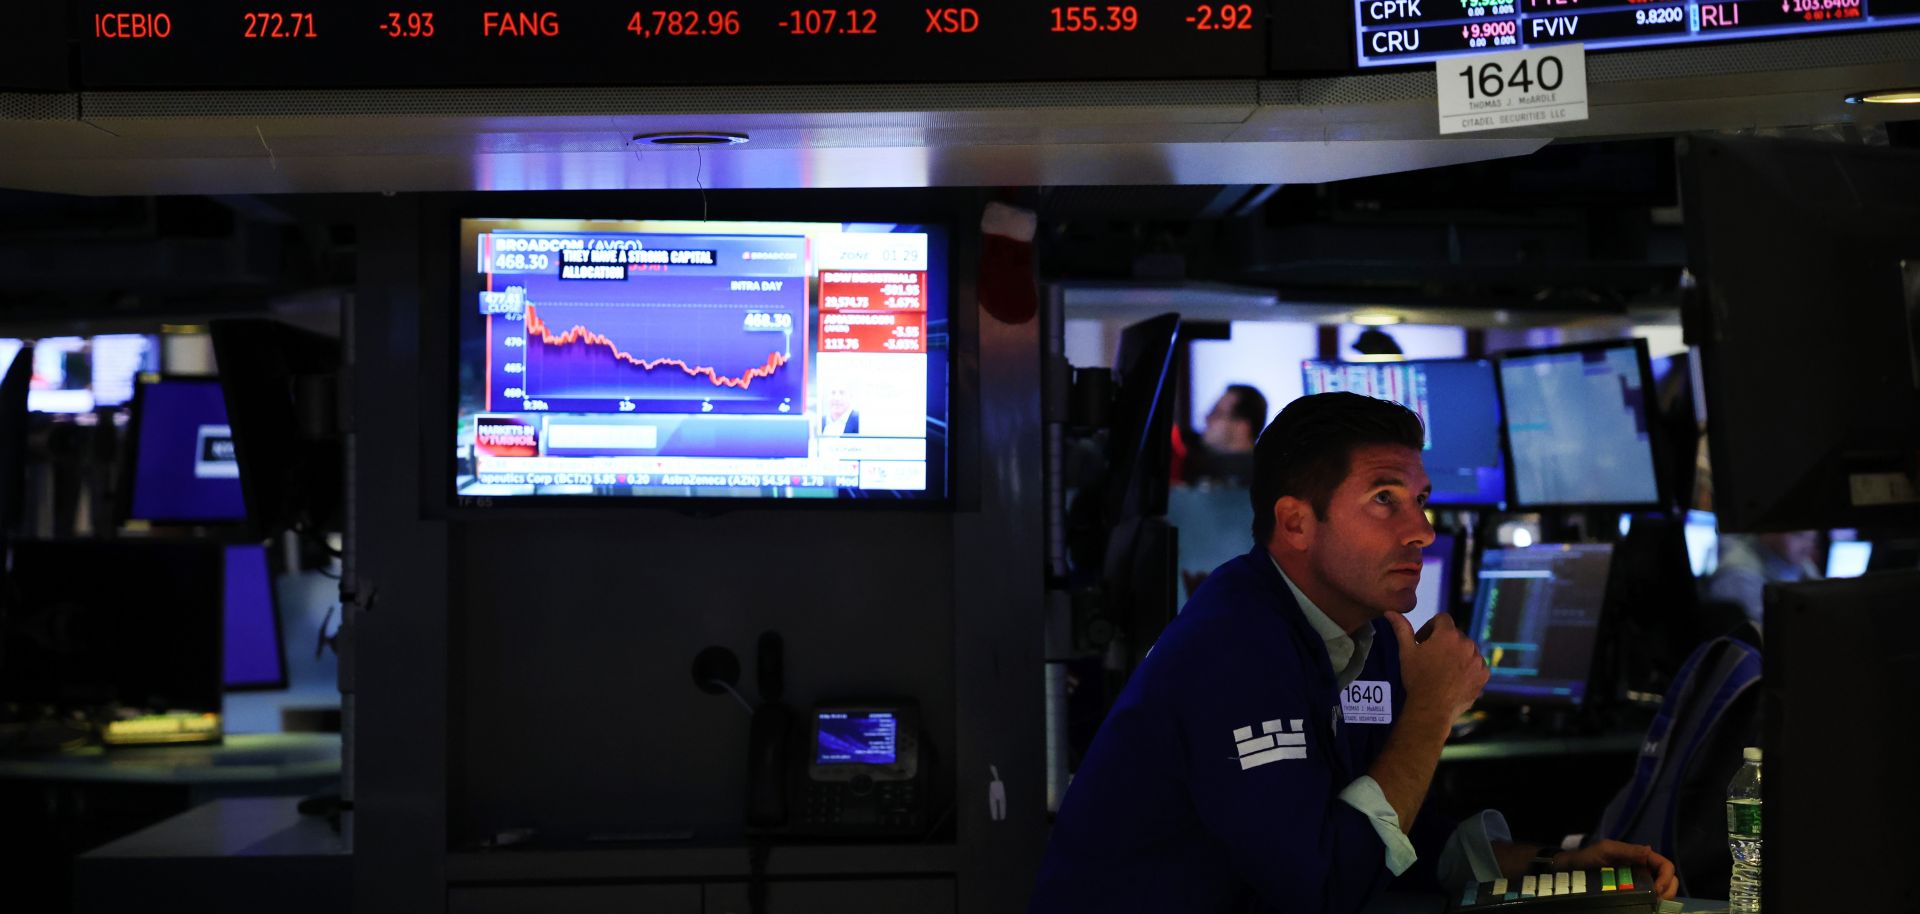 Traders work on the floor of the New York Stock Exchange (NYSE) on Sept. 23, 2022. The Dow Jones Industrial Average dropped more than 400 points that day amid fears of a looming recession.